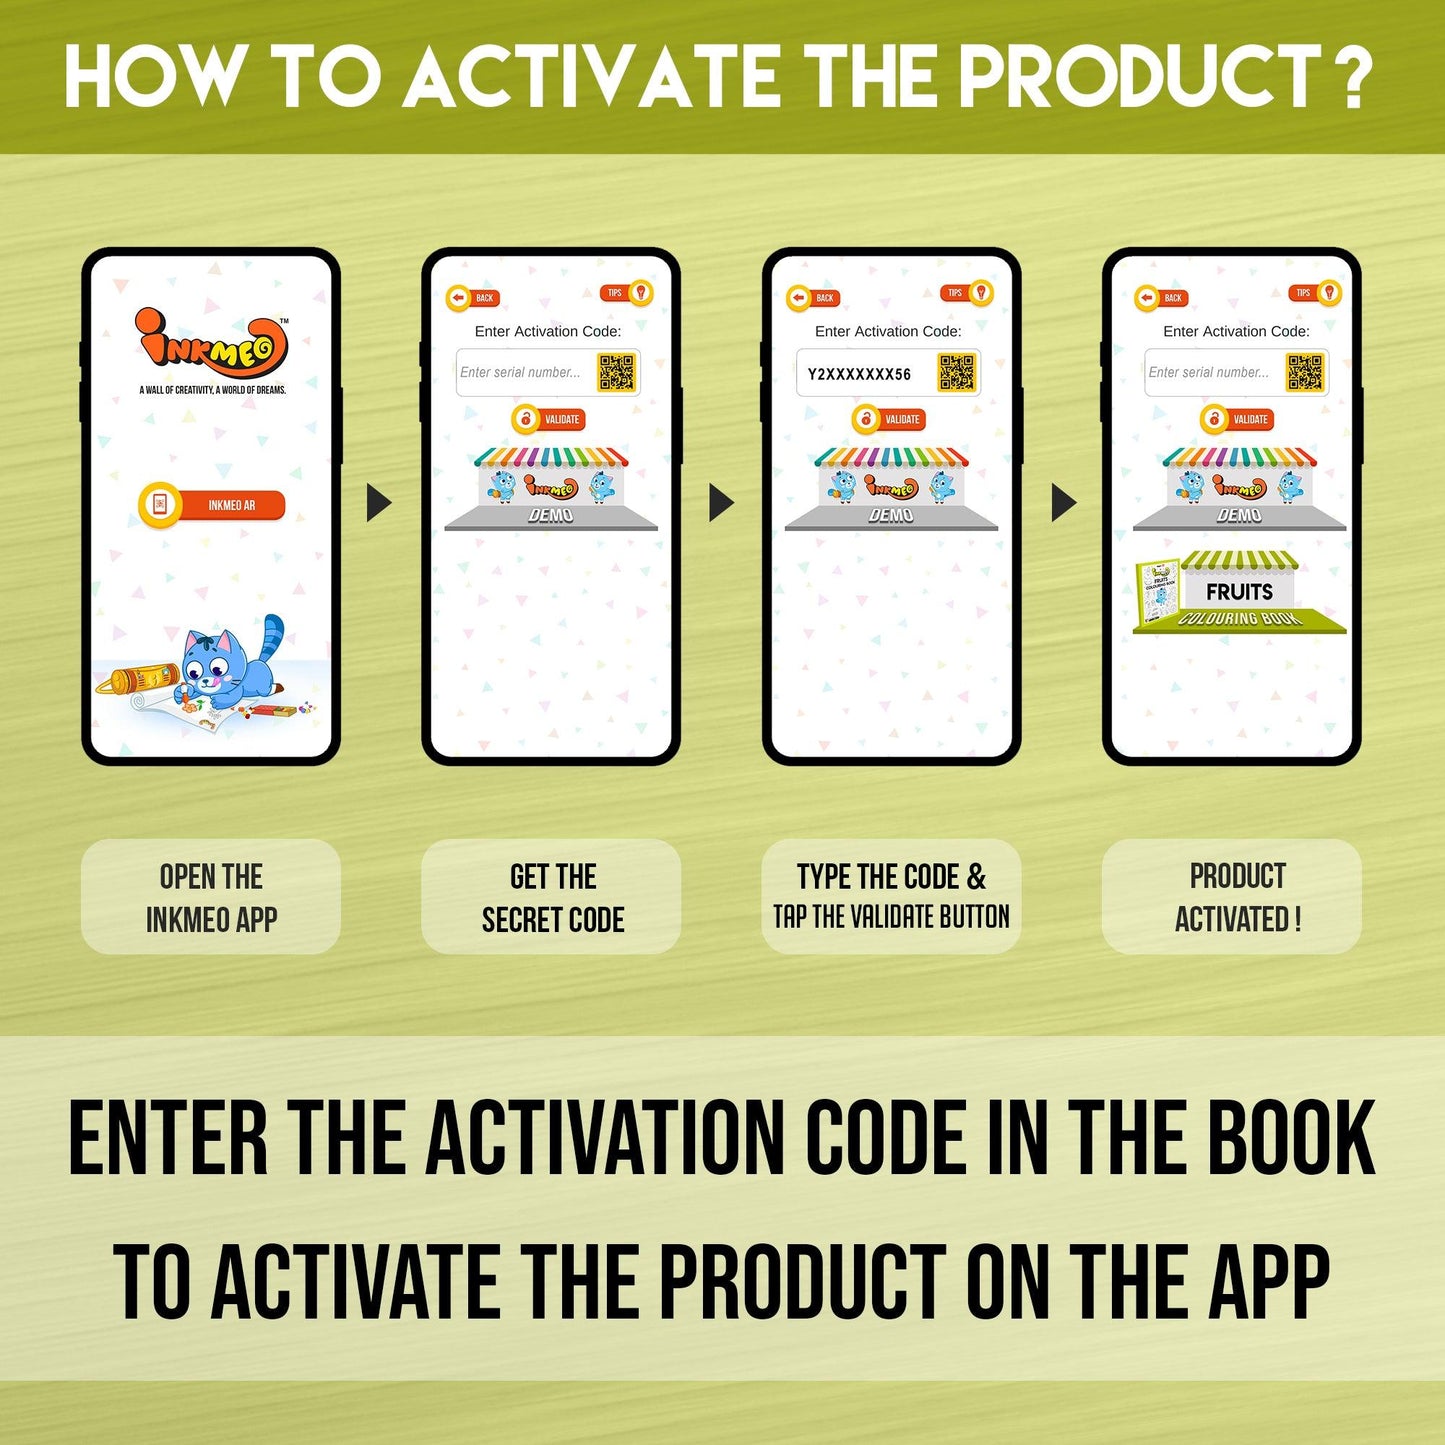 The image displays a green background with four phones showcasing the message "To access the Inkmeo app, acquire the secret code, input the code, and tap for validation to activate the product.